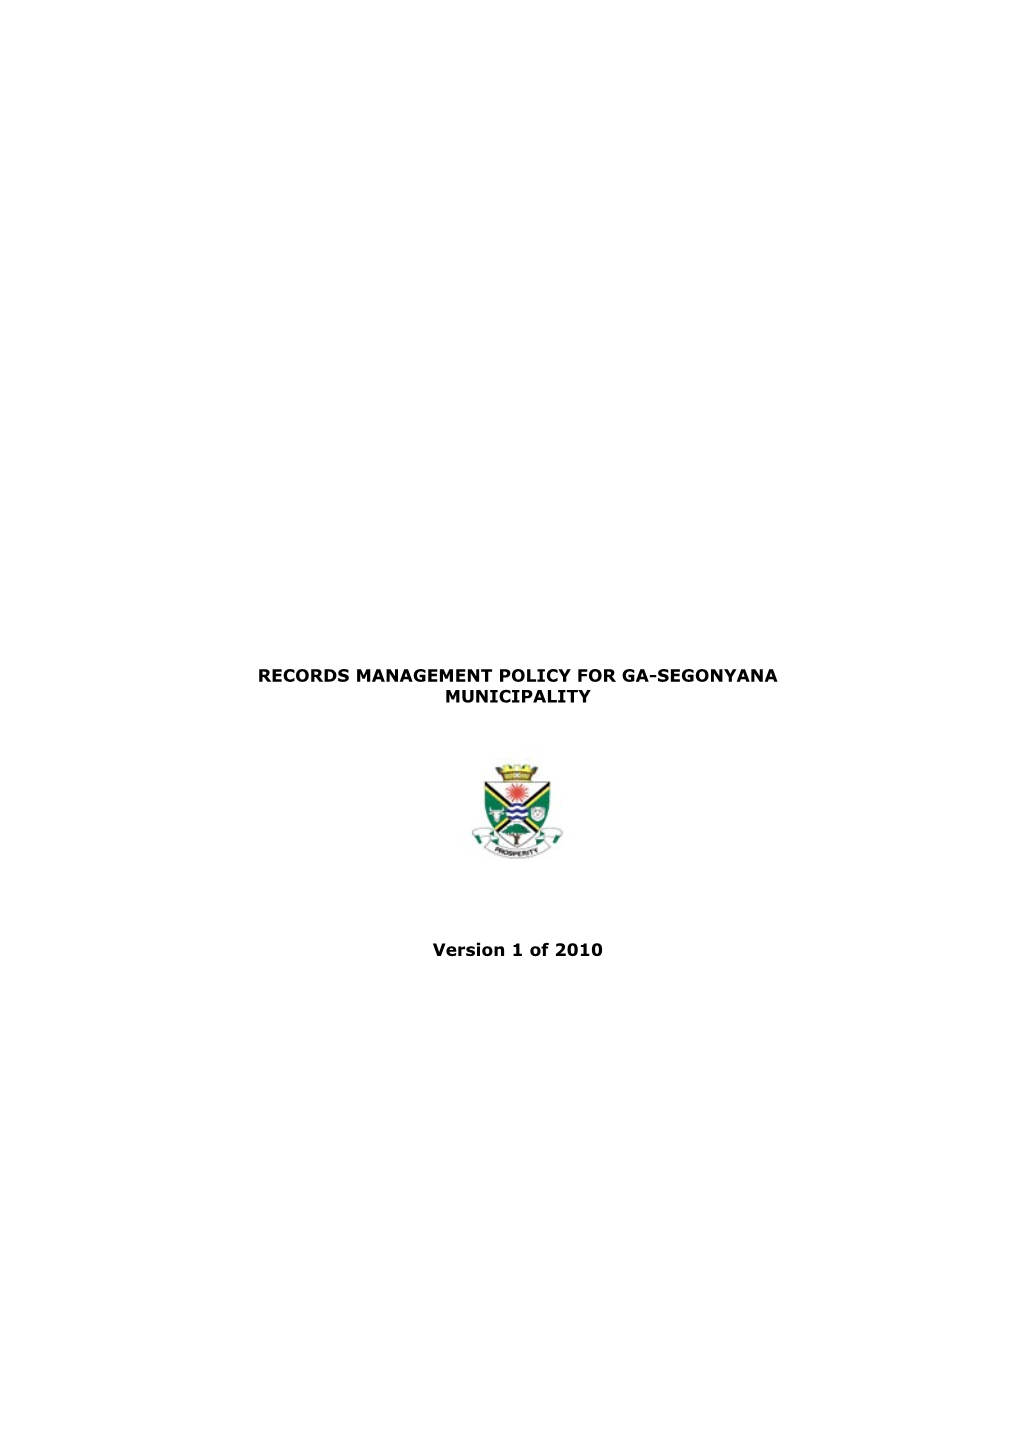 Annexure 4: Guidelines for the Development of a Records Management Policy and Example Of